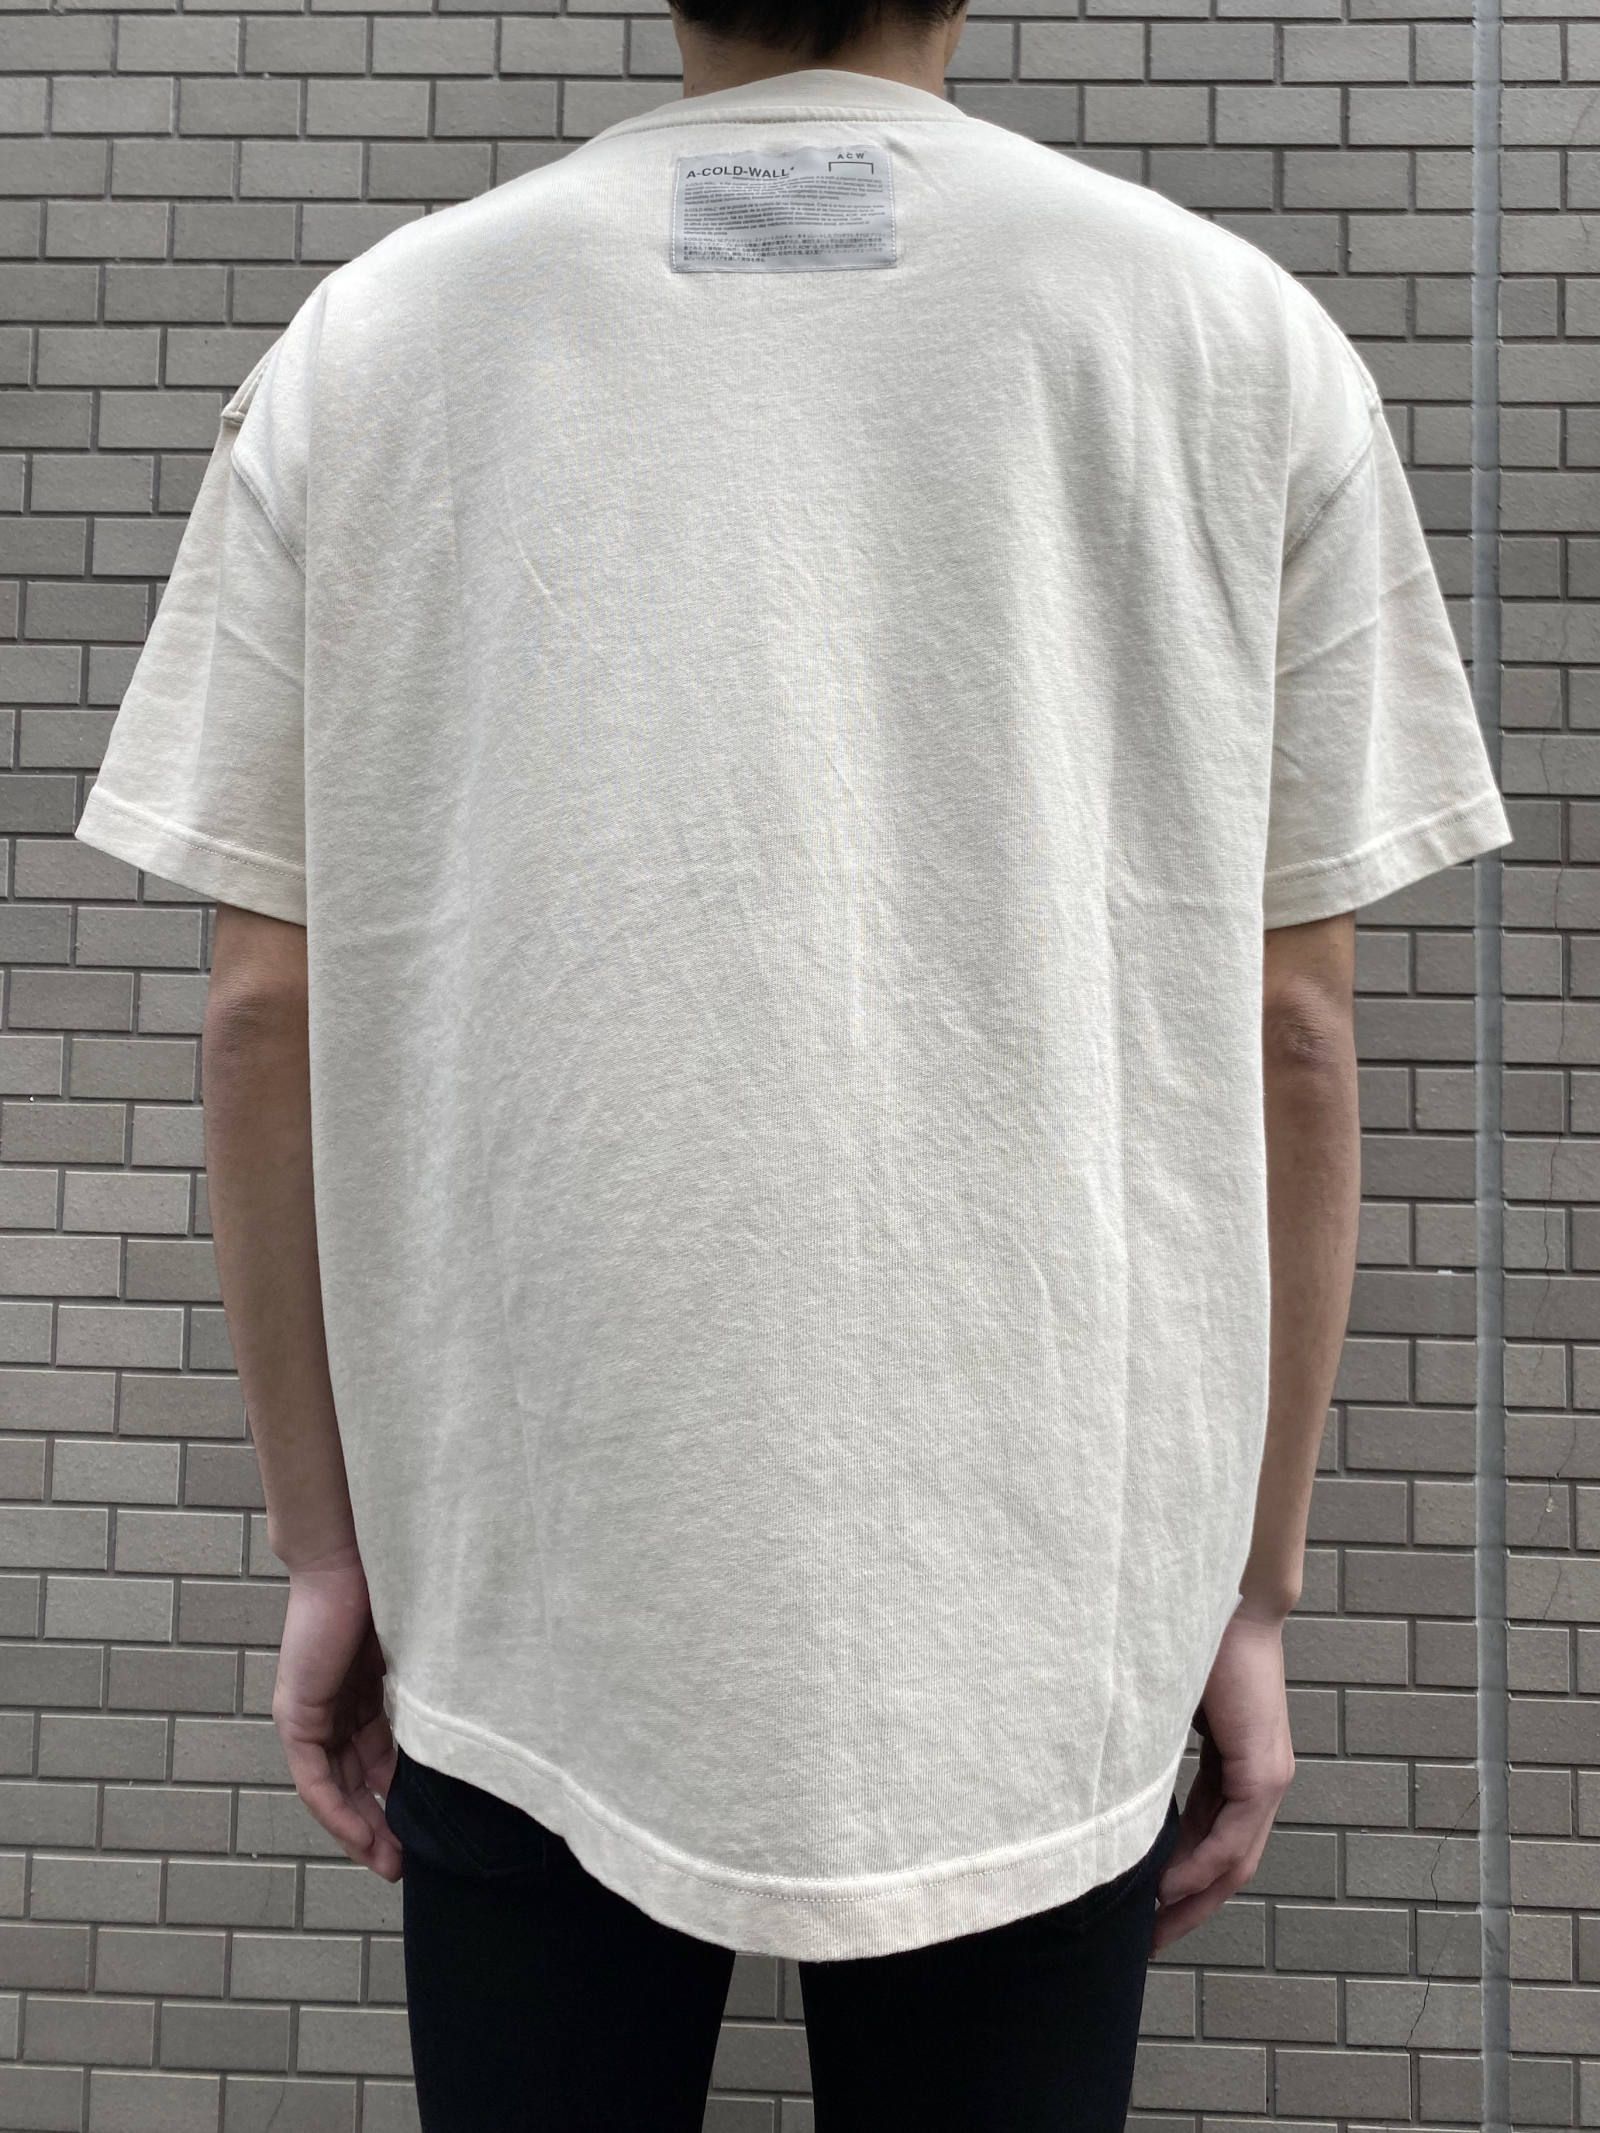 A-COLD-WALL* - ロゴプリントカットソー LOGO T SHIRT - ALMOND MILK ...